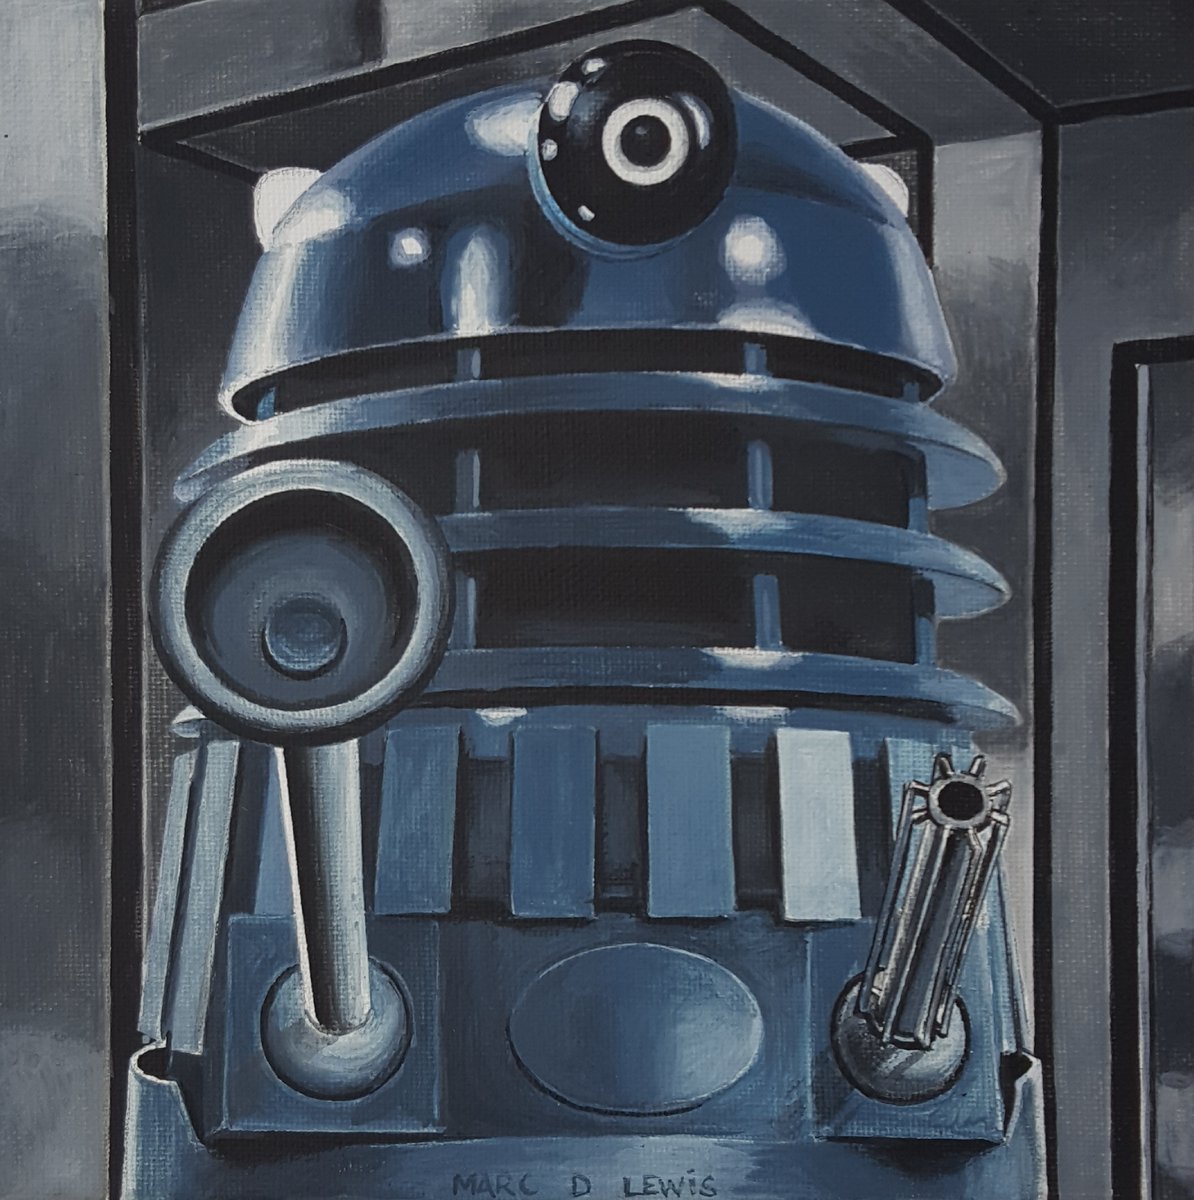 'We will emerge and take our rightful place as the supreme power of the universe!' 🤖 #DoctorWho #DrWho #DoctorWhoFanArt #Daleks #GenesisOfTheDaleks #CanvasArt #Painting #Illustration #Art